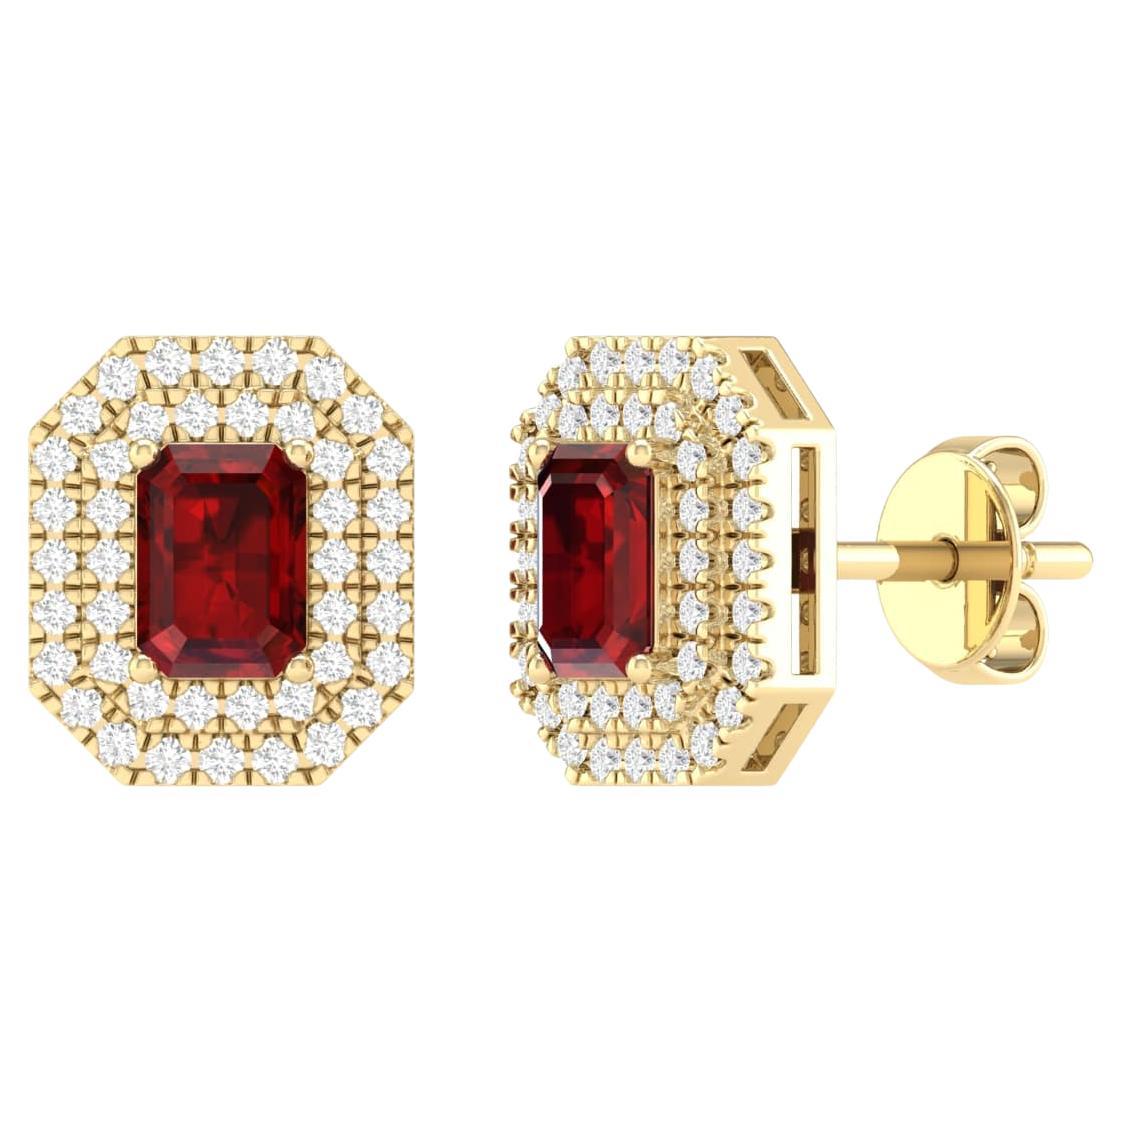 18 Karat Yellow Gold 1.26 Carat Ruby Solitaire Stud Earrings For Sale